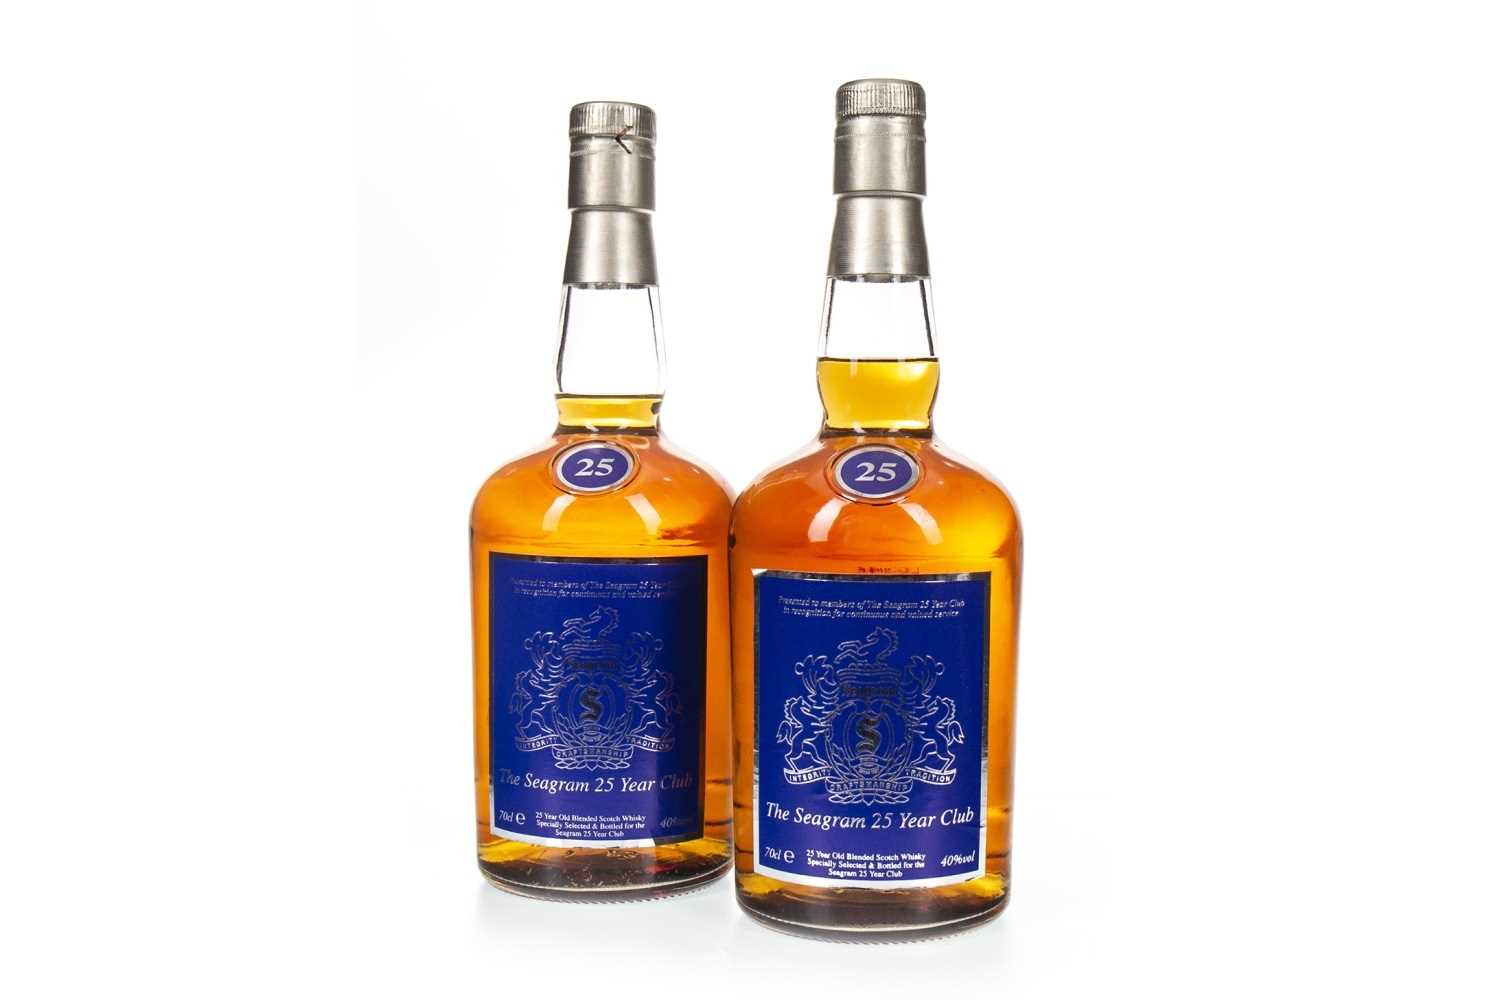 Lot 96 - TWO BOTTLES OF THE SEAGRAM 25 YEAR CLUB